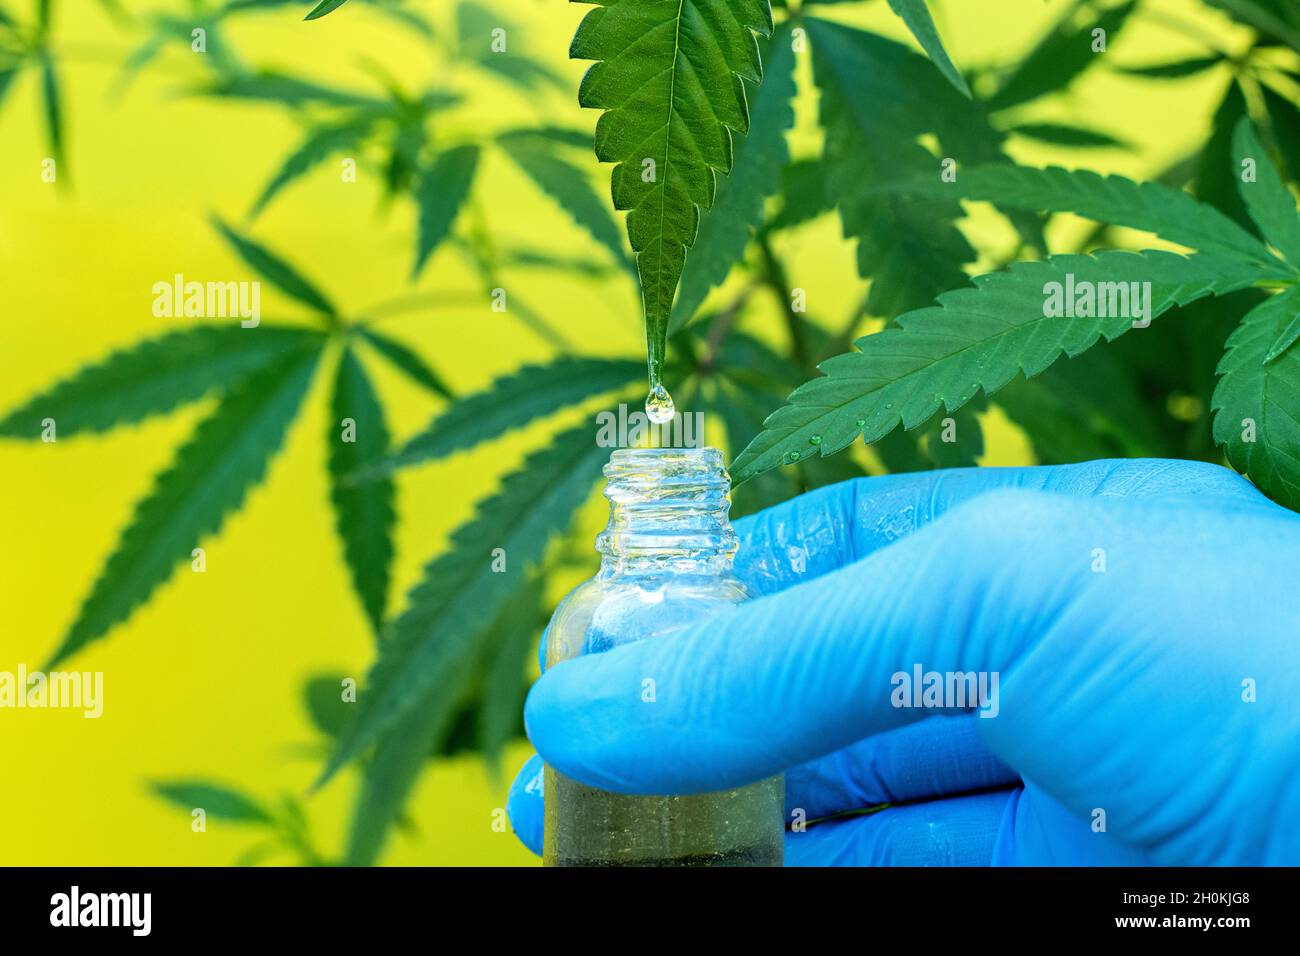 representation of oil or resin extraction from marijuana plant Stock Photo